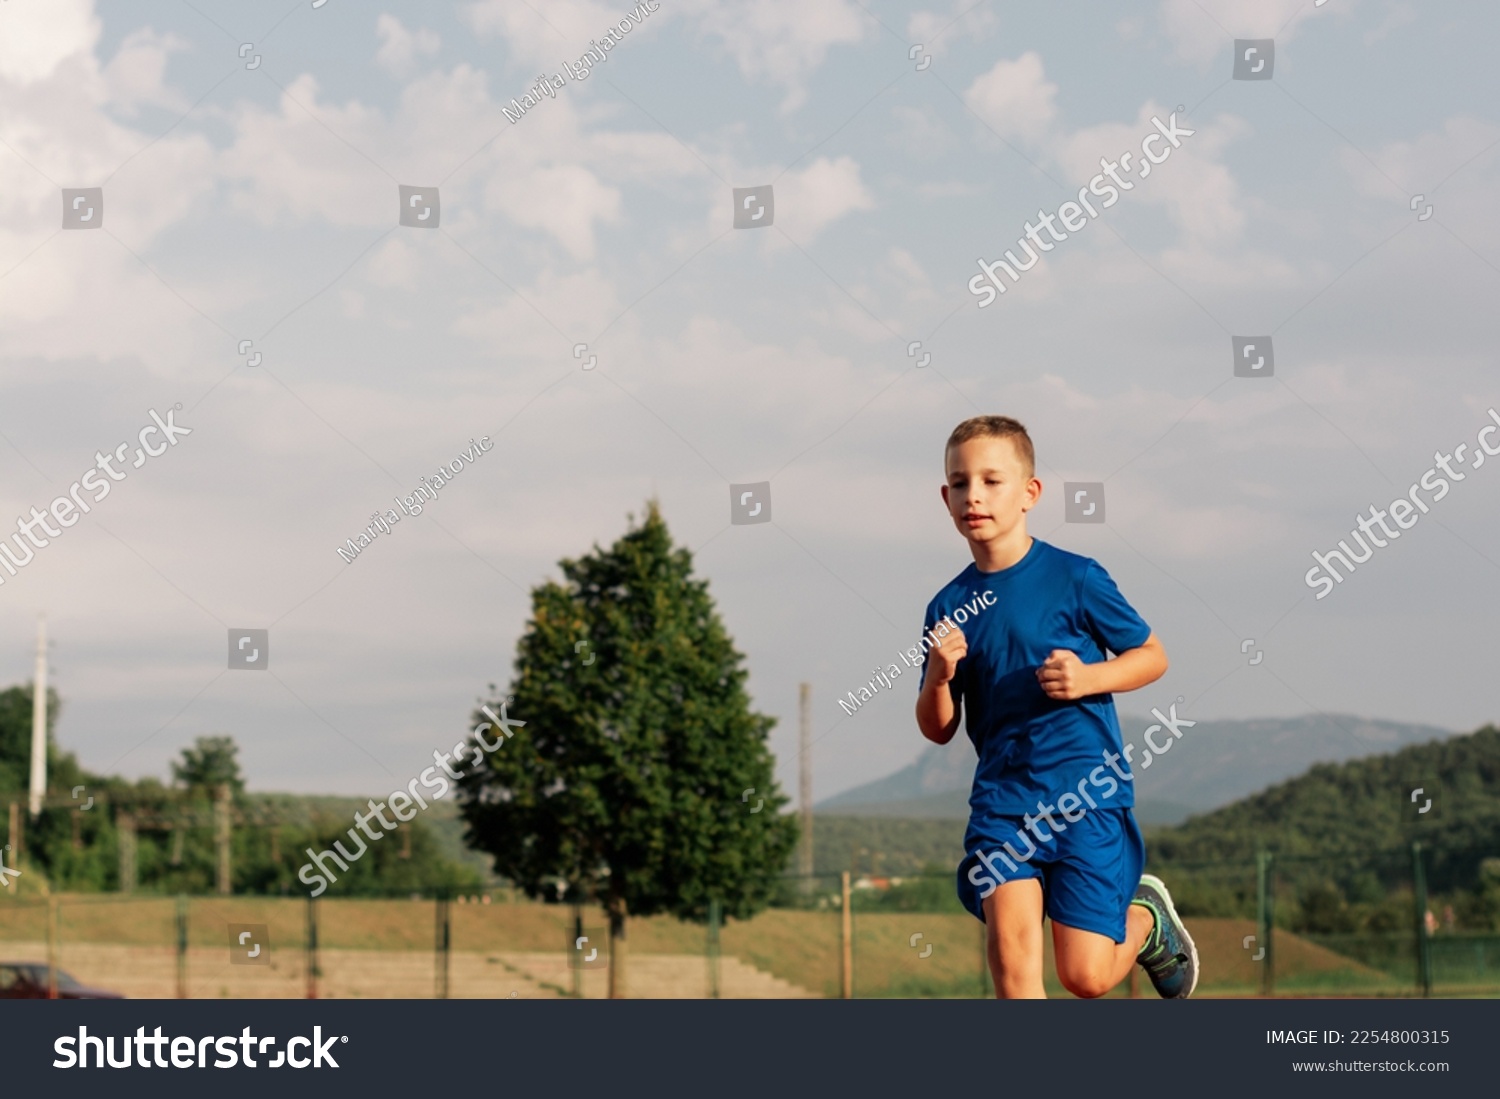 Boy running on outdoor track during summer day #2254800315